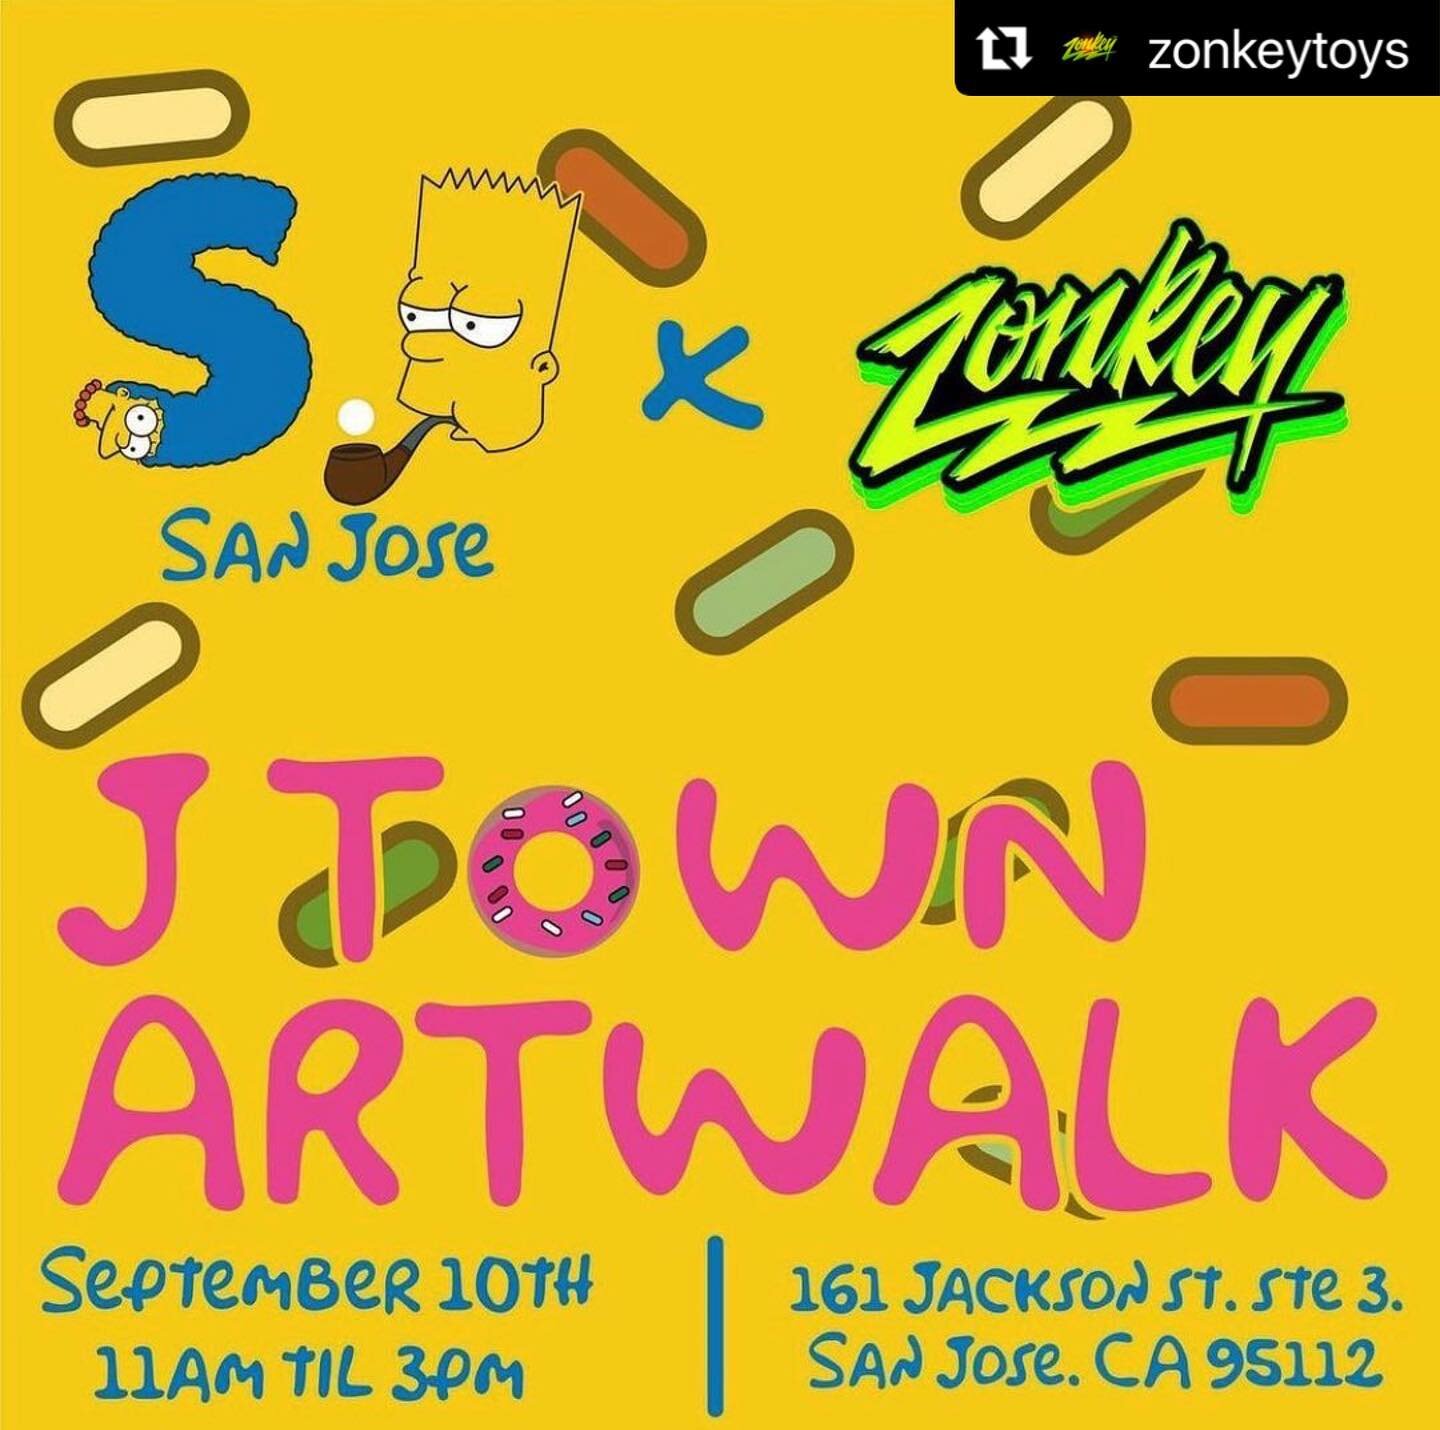 This weekend! 🙌 #Repost @zonkeytoys 
・・・
@sanjosesimpsons is gonna be out front of the store during @jtownartwalk next Saturday, September 10th, 11am to 3pm! 👍
.
.
.
.
#thesimpsons #localartists #supportlocalartists #toystore #designerart #collecti